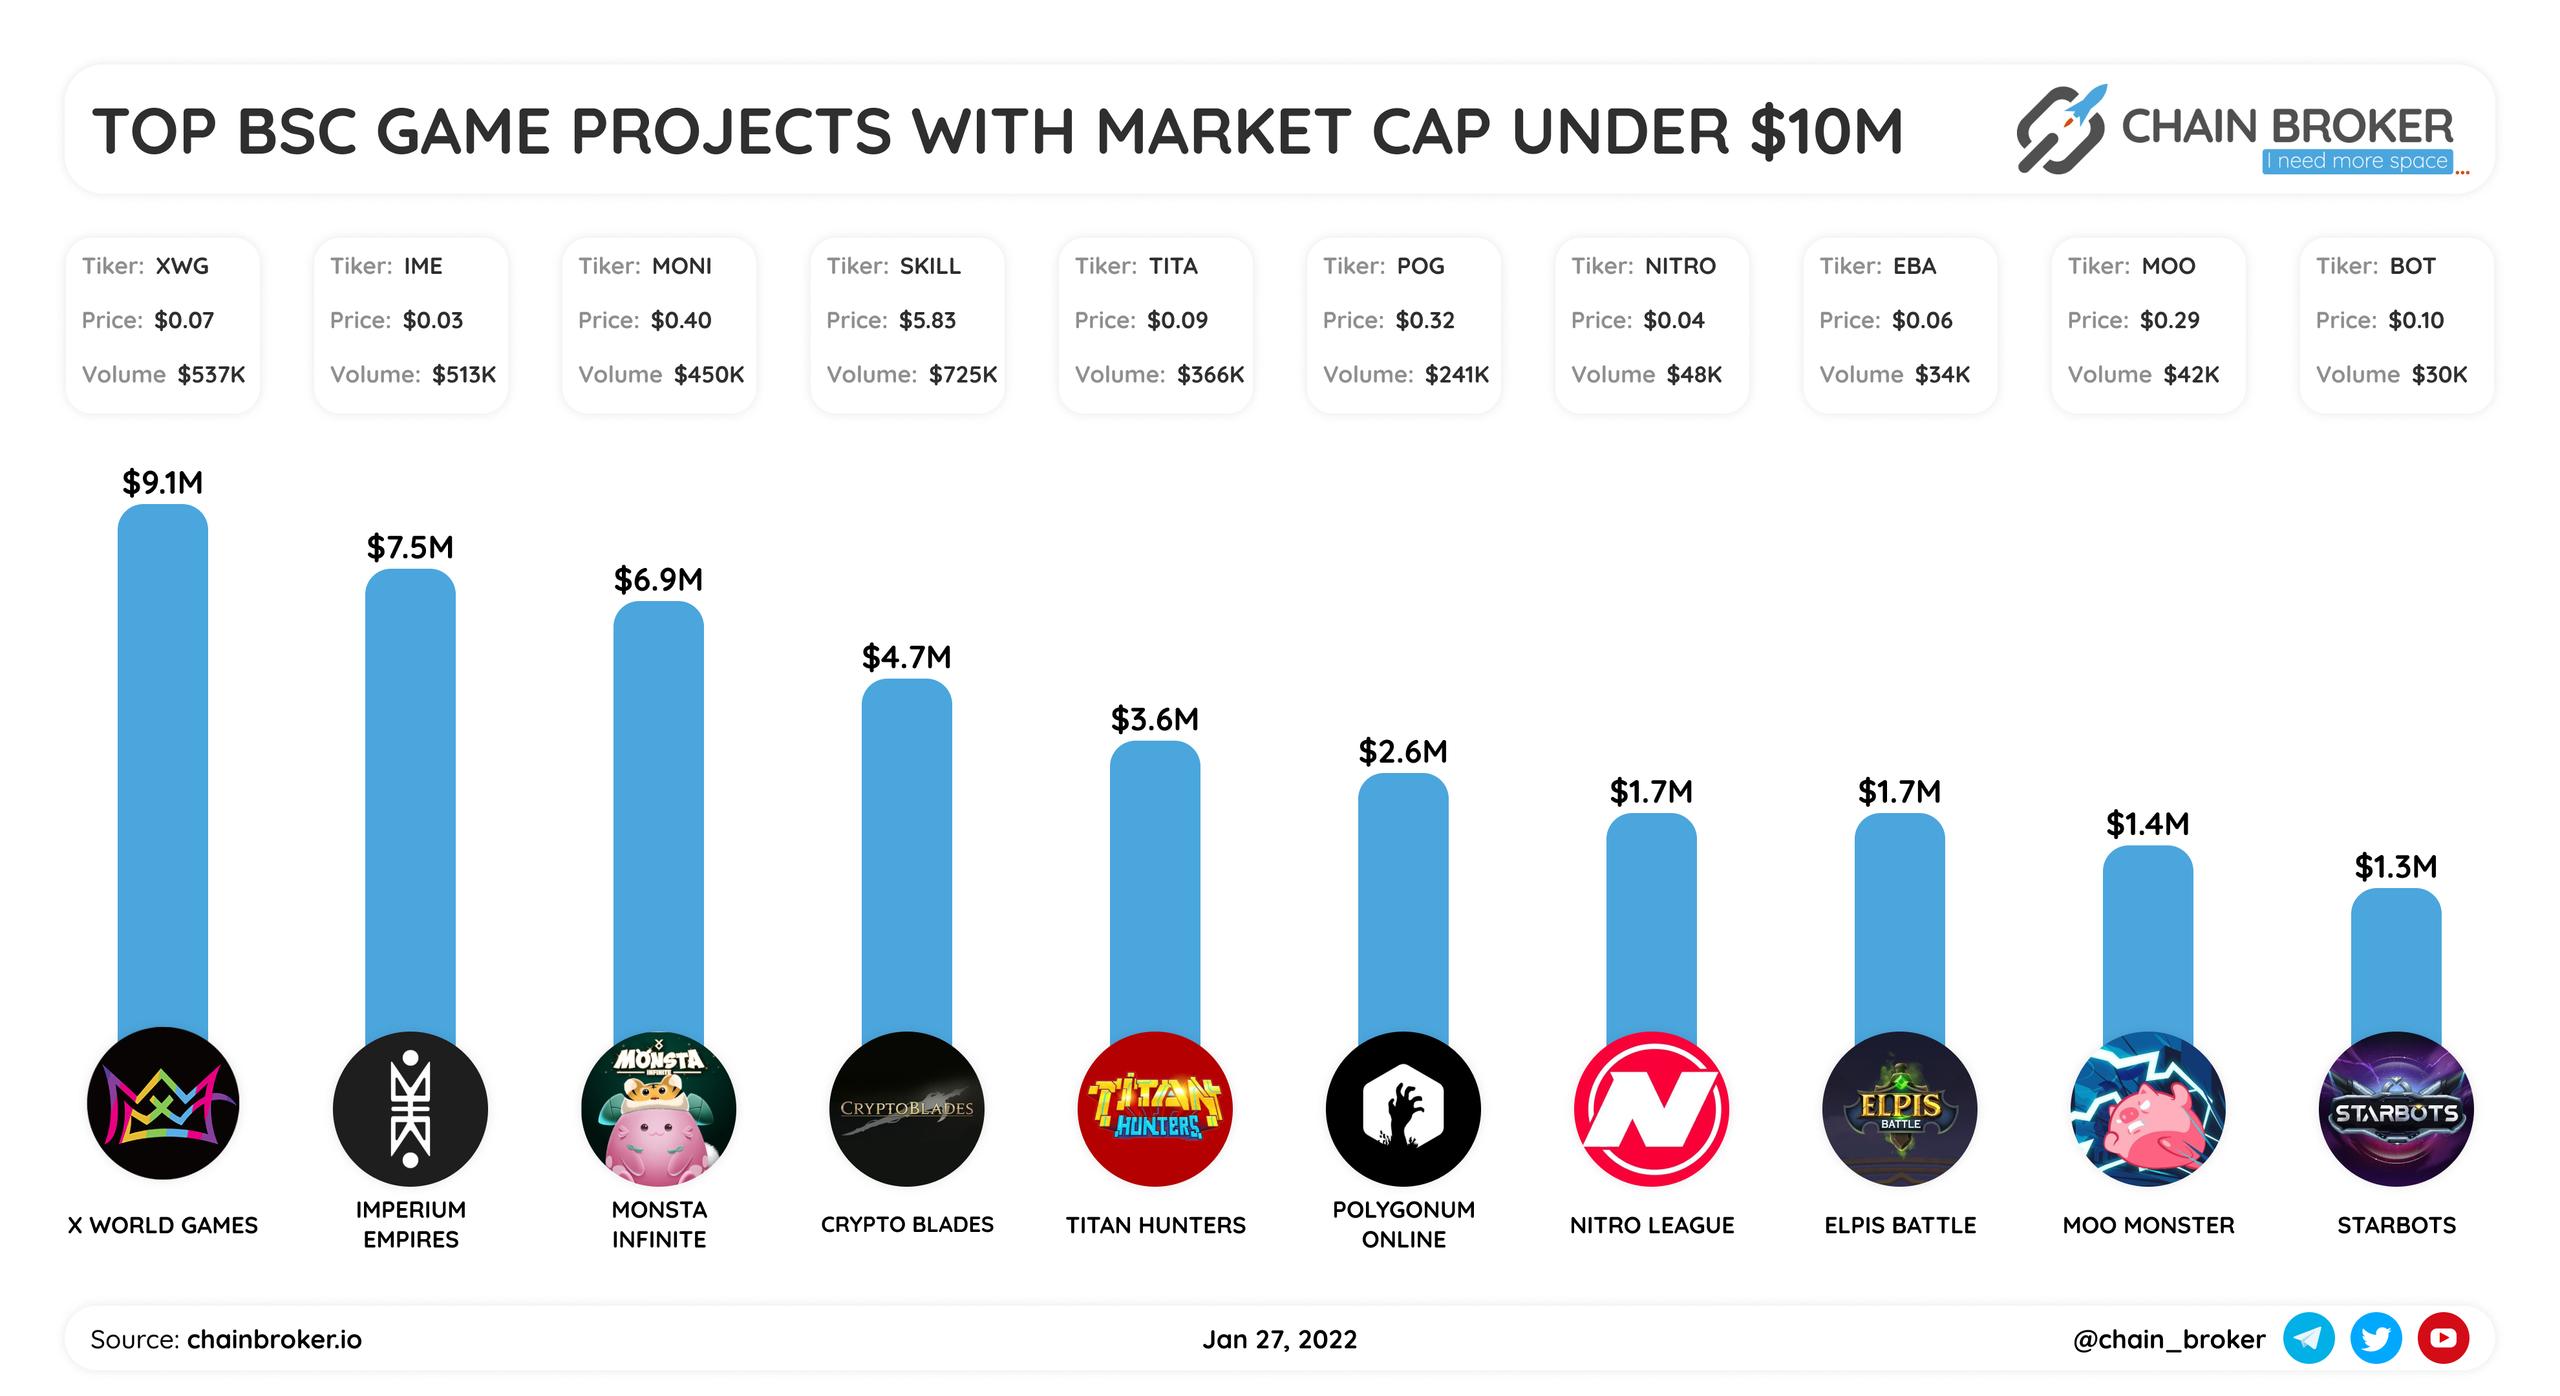 Top BSC Gaming projects with market cap under $10M